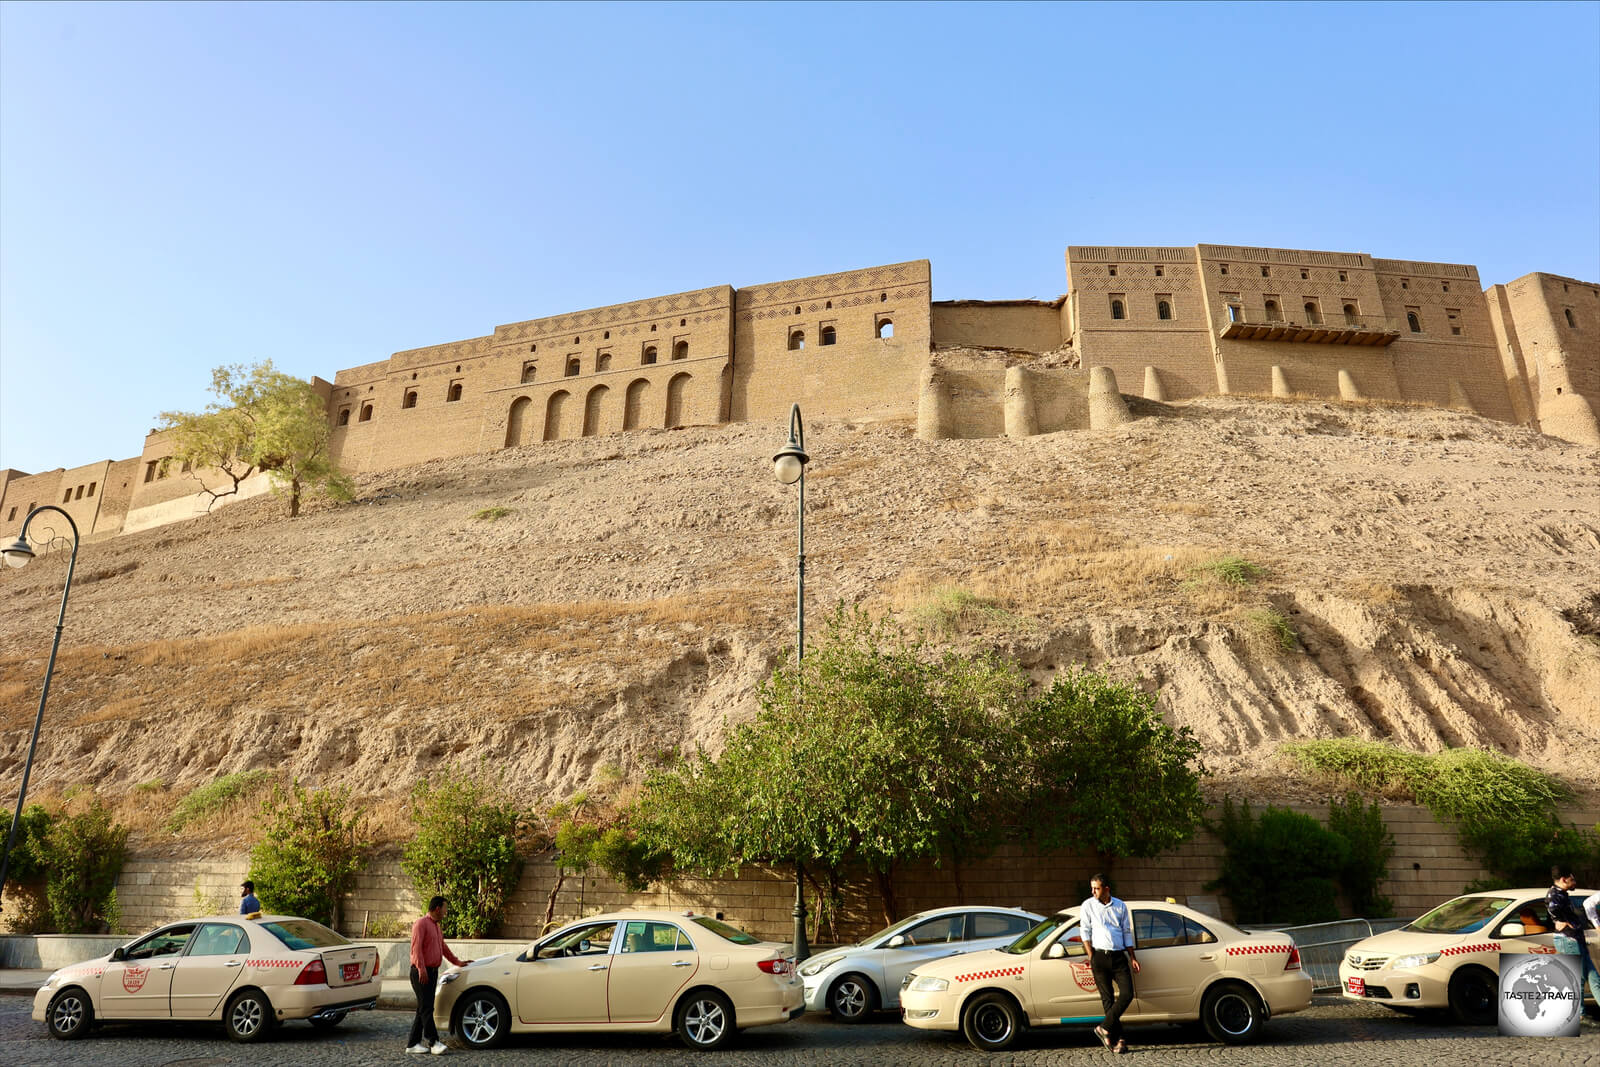 Taxis parked outside Erbil Citadel. 